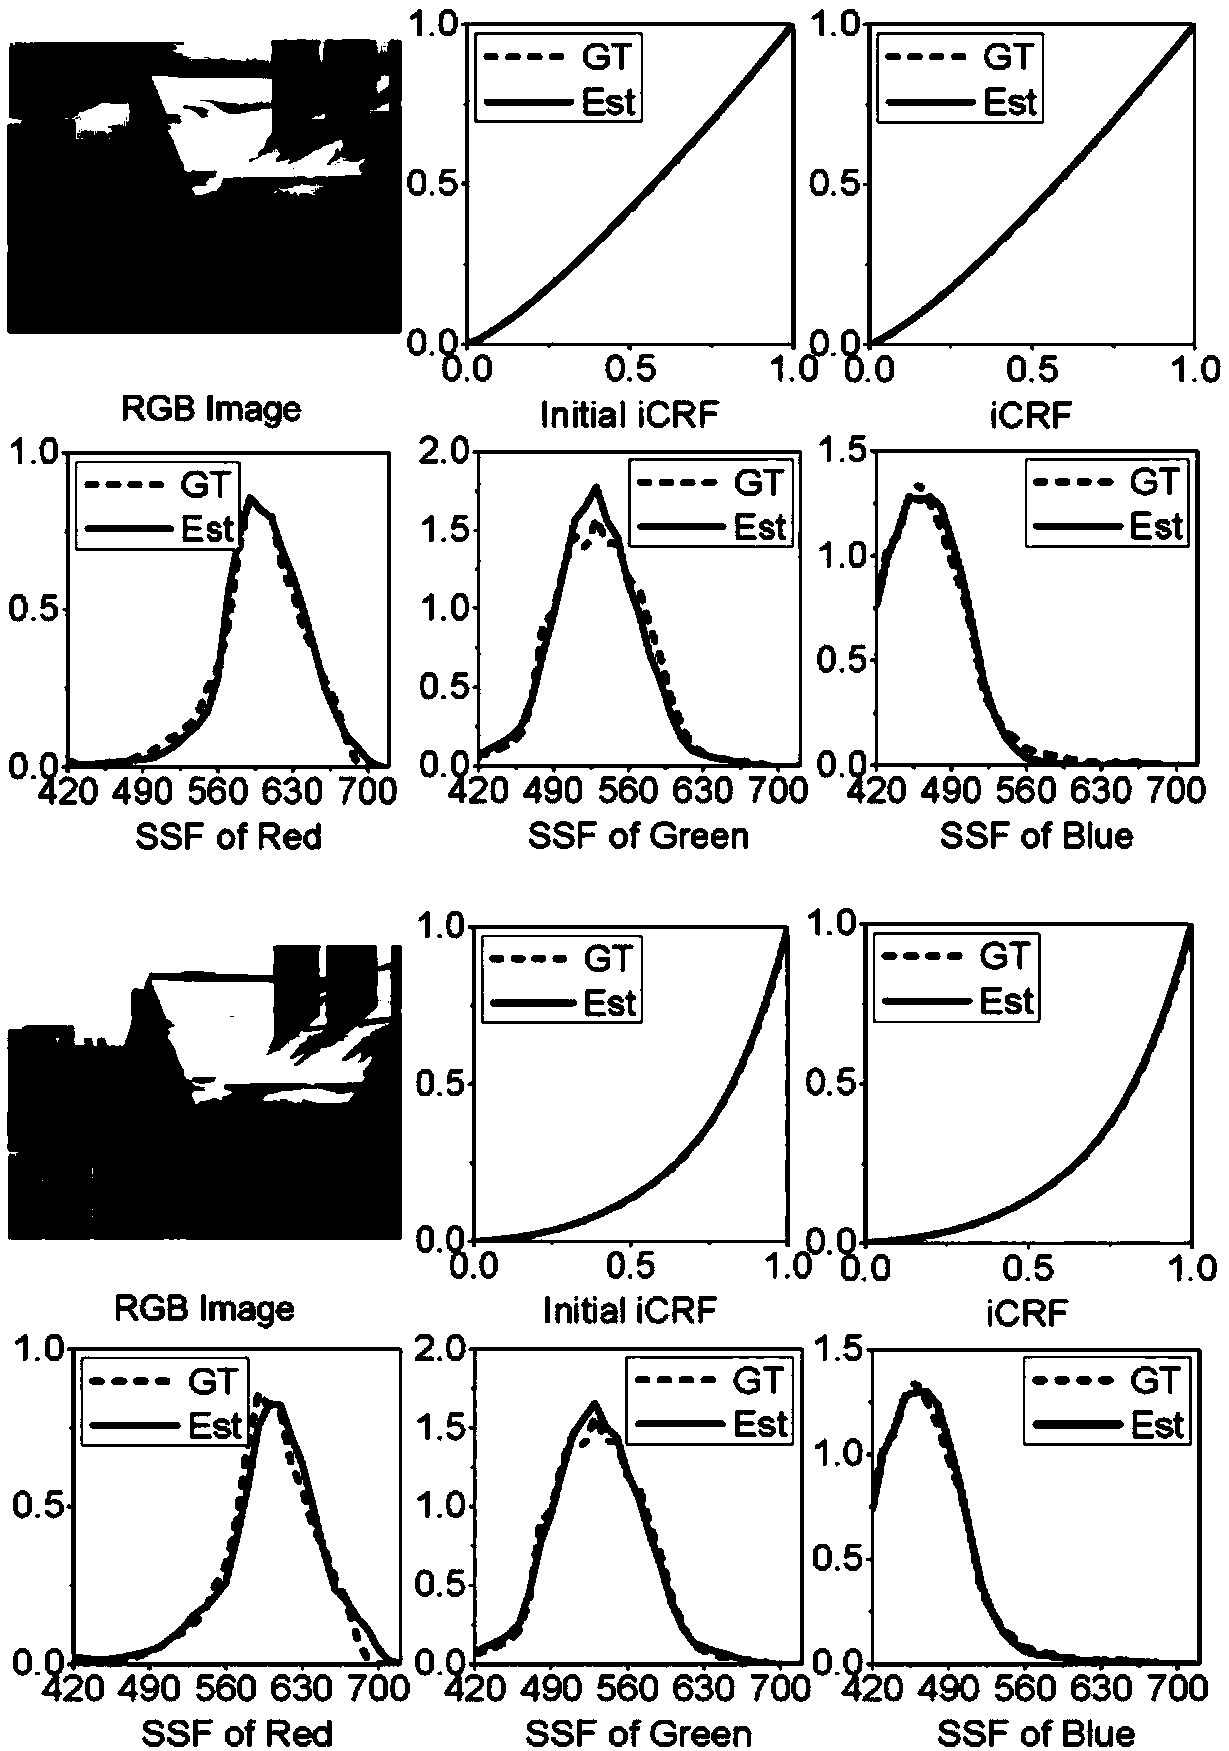 A method for radiometric calibration of a color camera by using a multispectral image